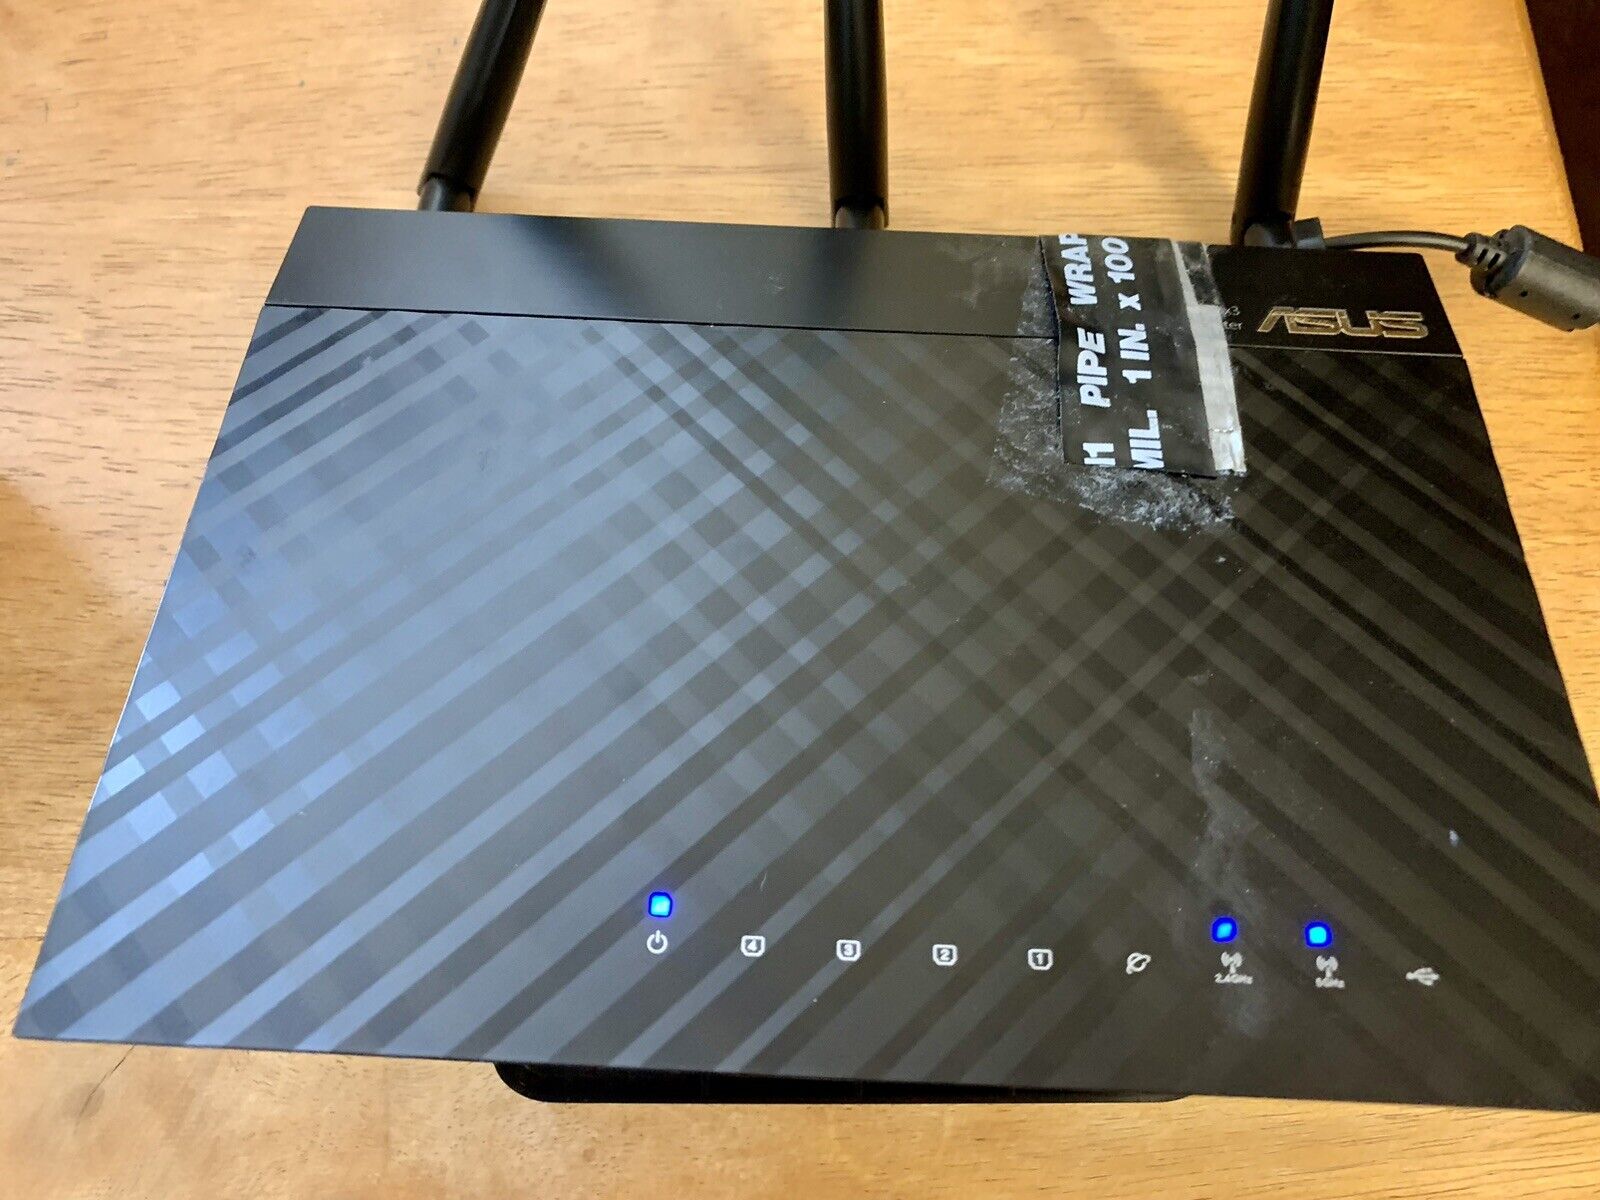 ASUS RT-AC66U Dual-Band Gigabit Router with Adaptor